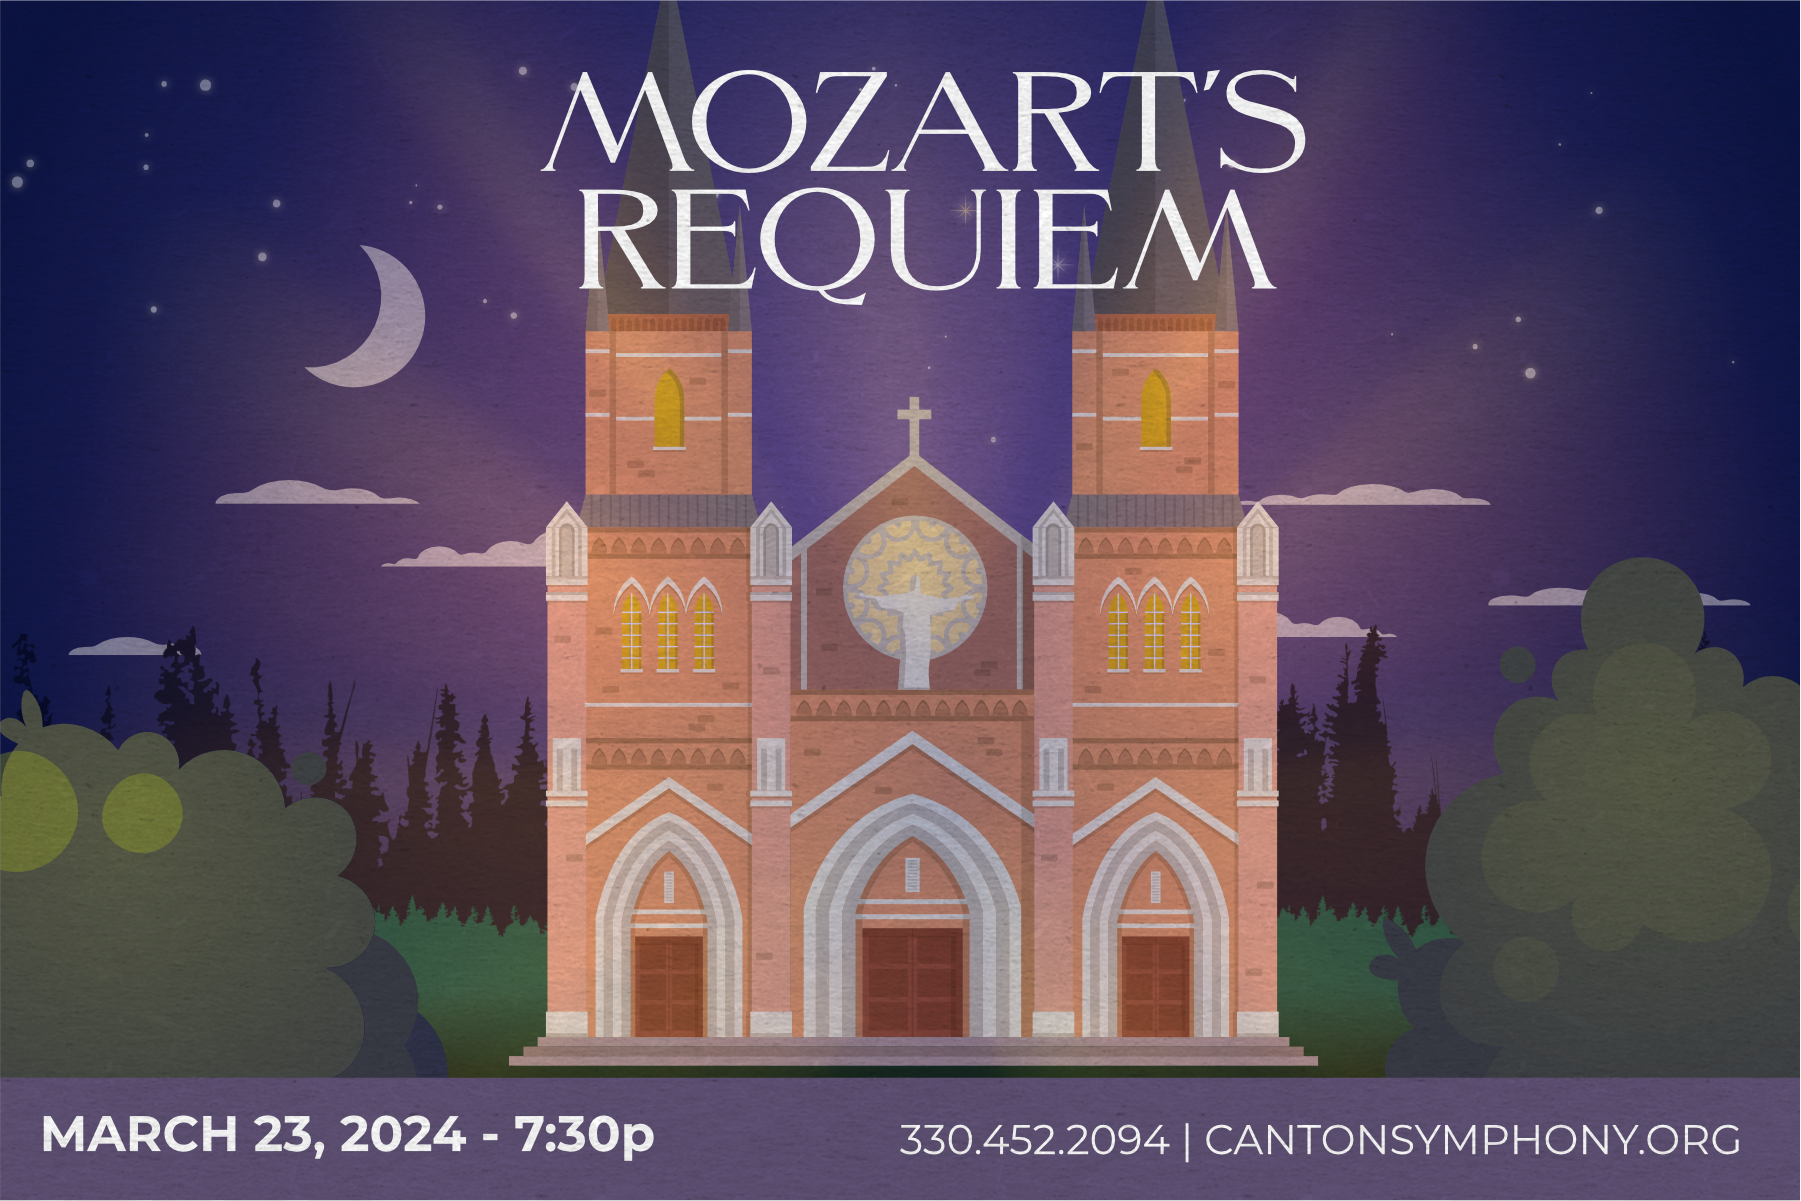 A graphic depicting a large, gothic cathedral framed by a gorgeously purple night sky. "Mozart's Requiem" punches through at the top of the graphic.